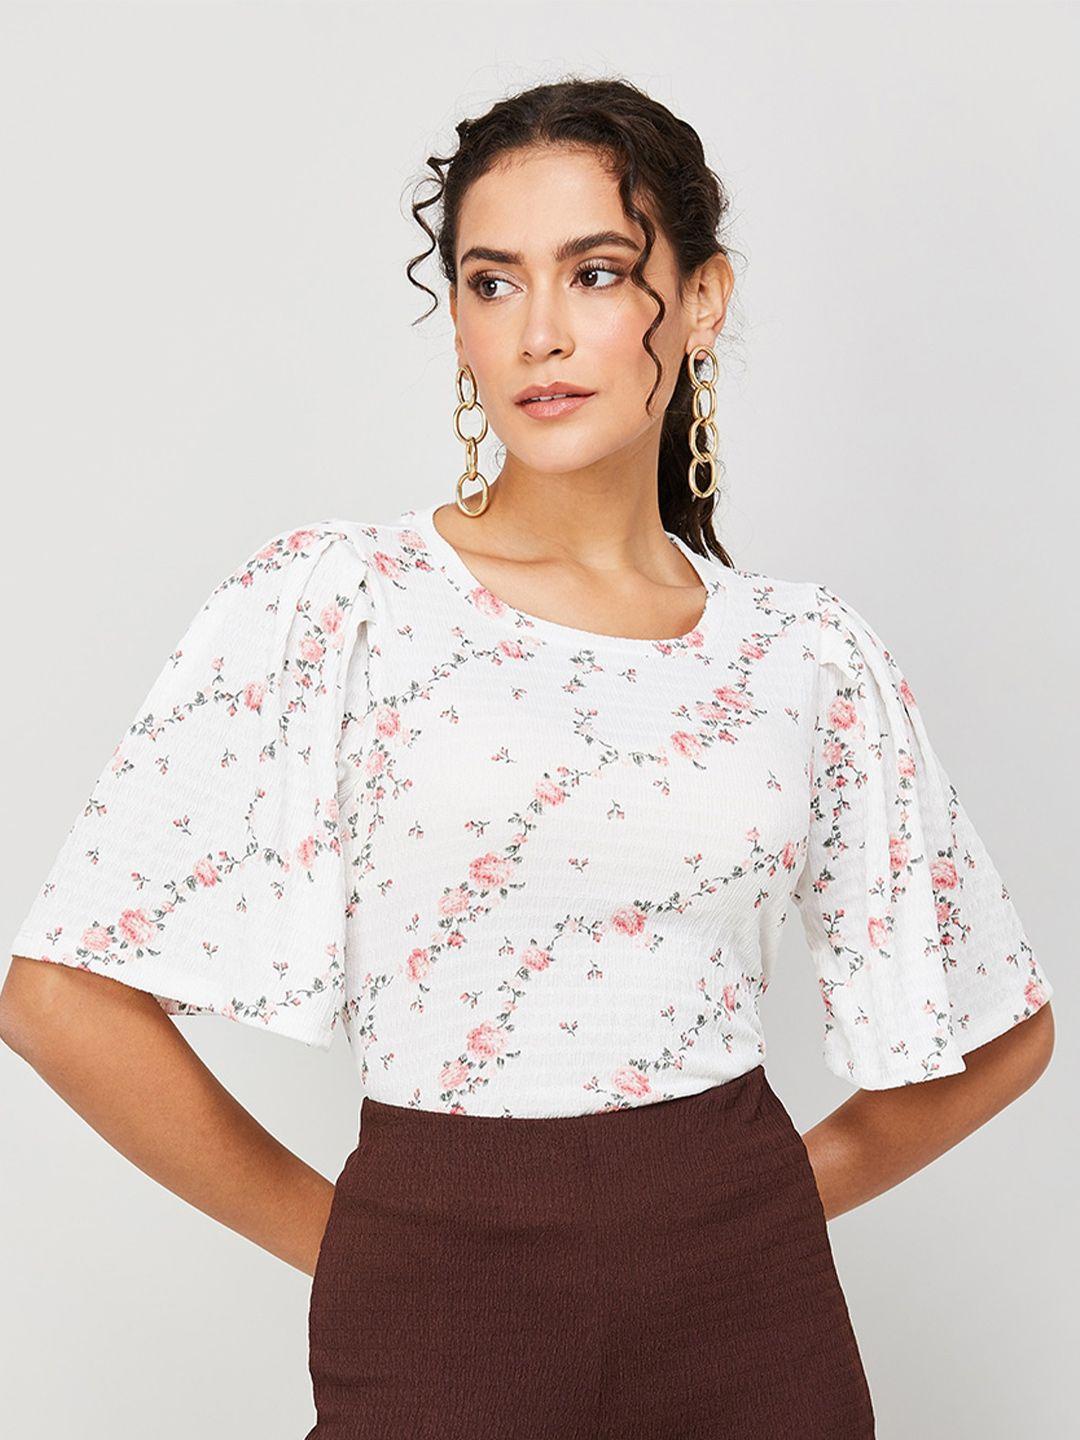 code by lifestyle floral print flared sleeve top